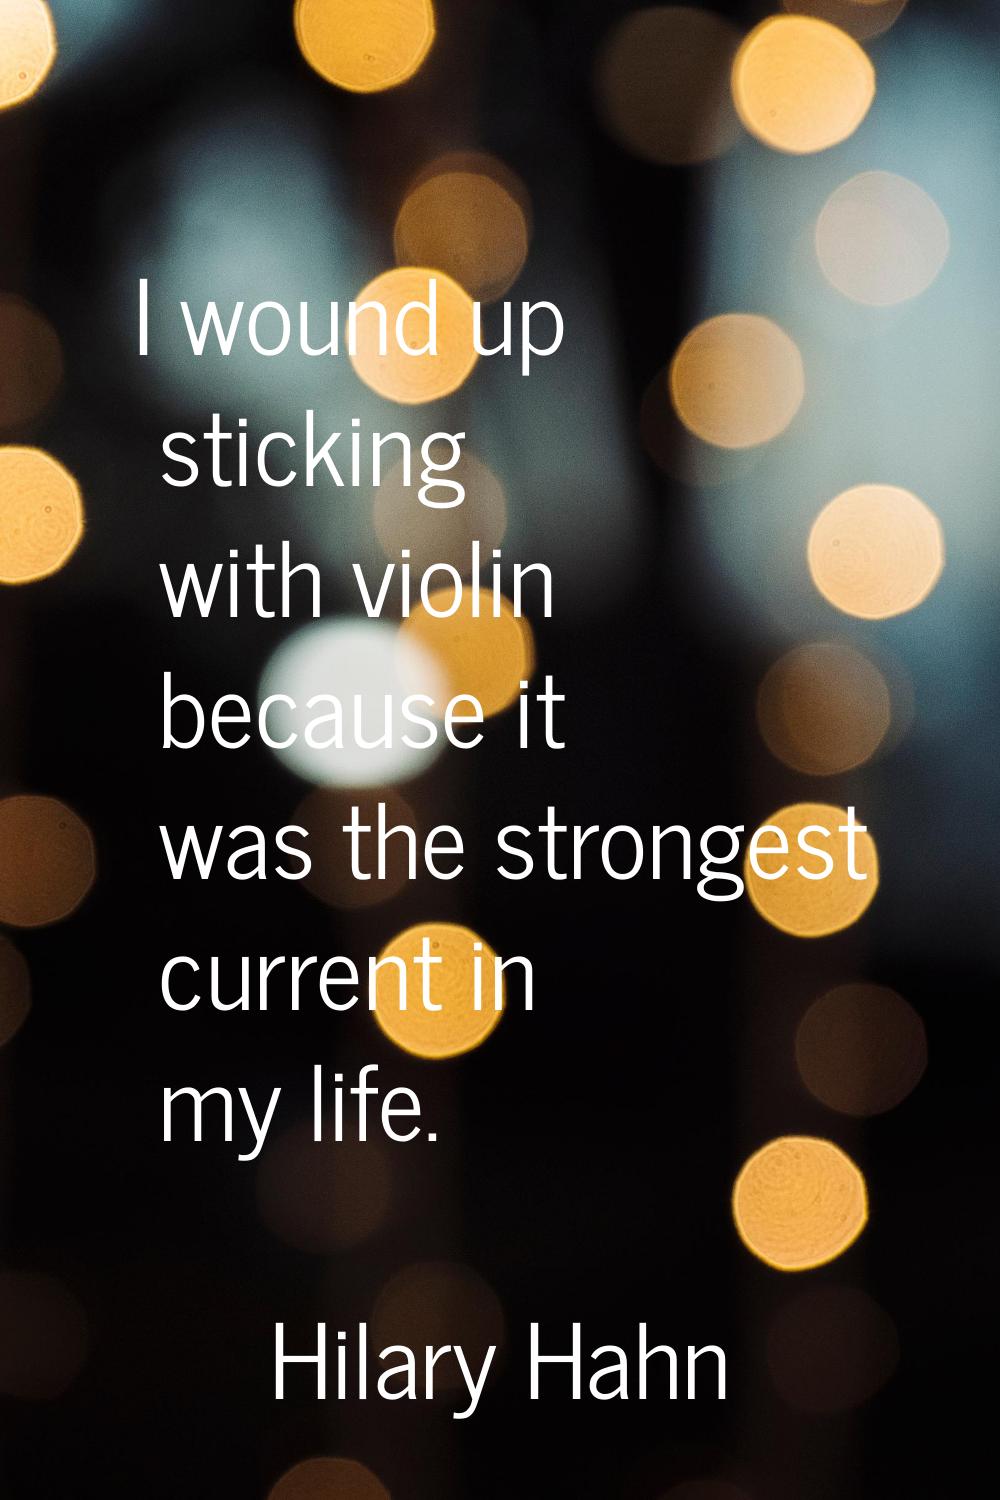 I wound up sticking with violin because it was the strongest current in my life.